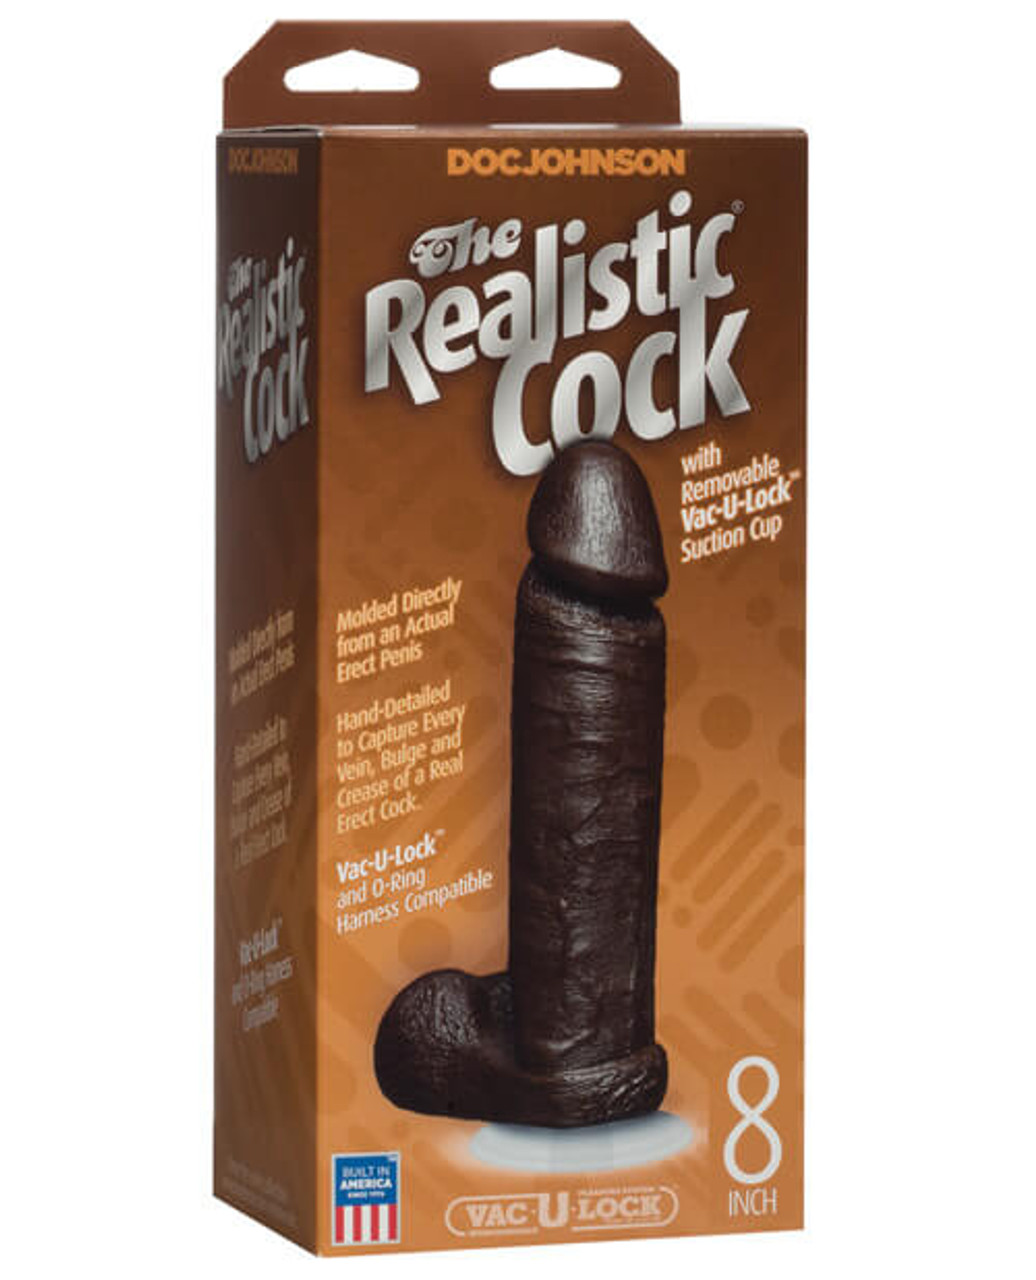 chris luty recommends 8 inch black penis pic